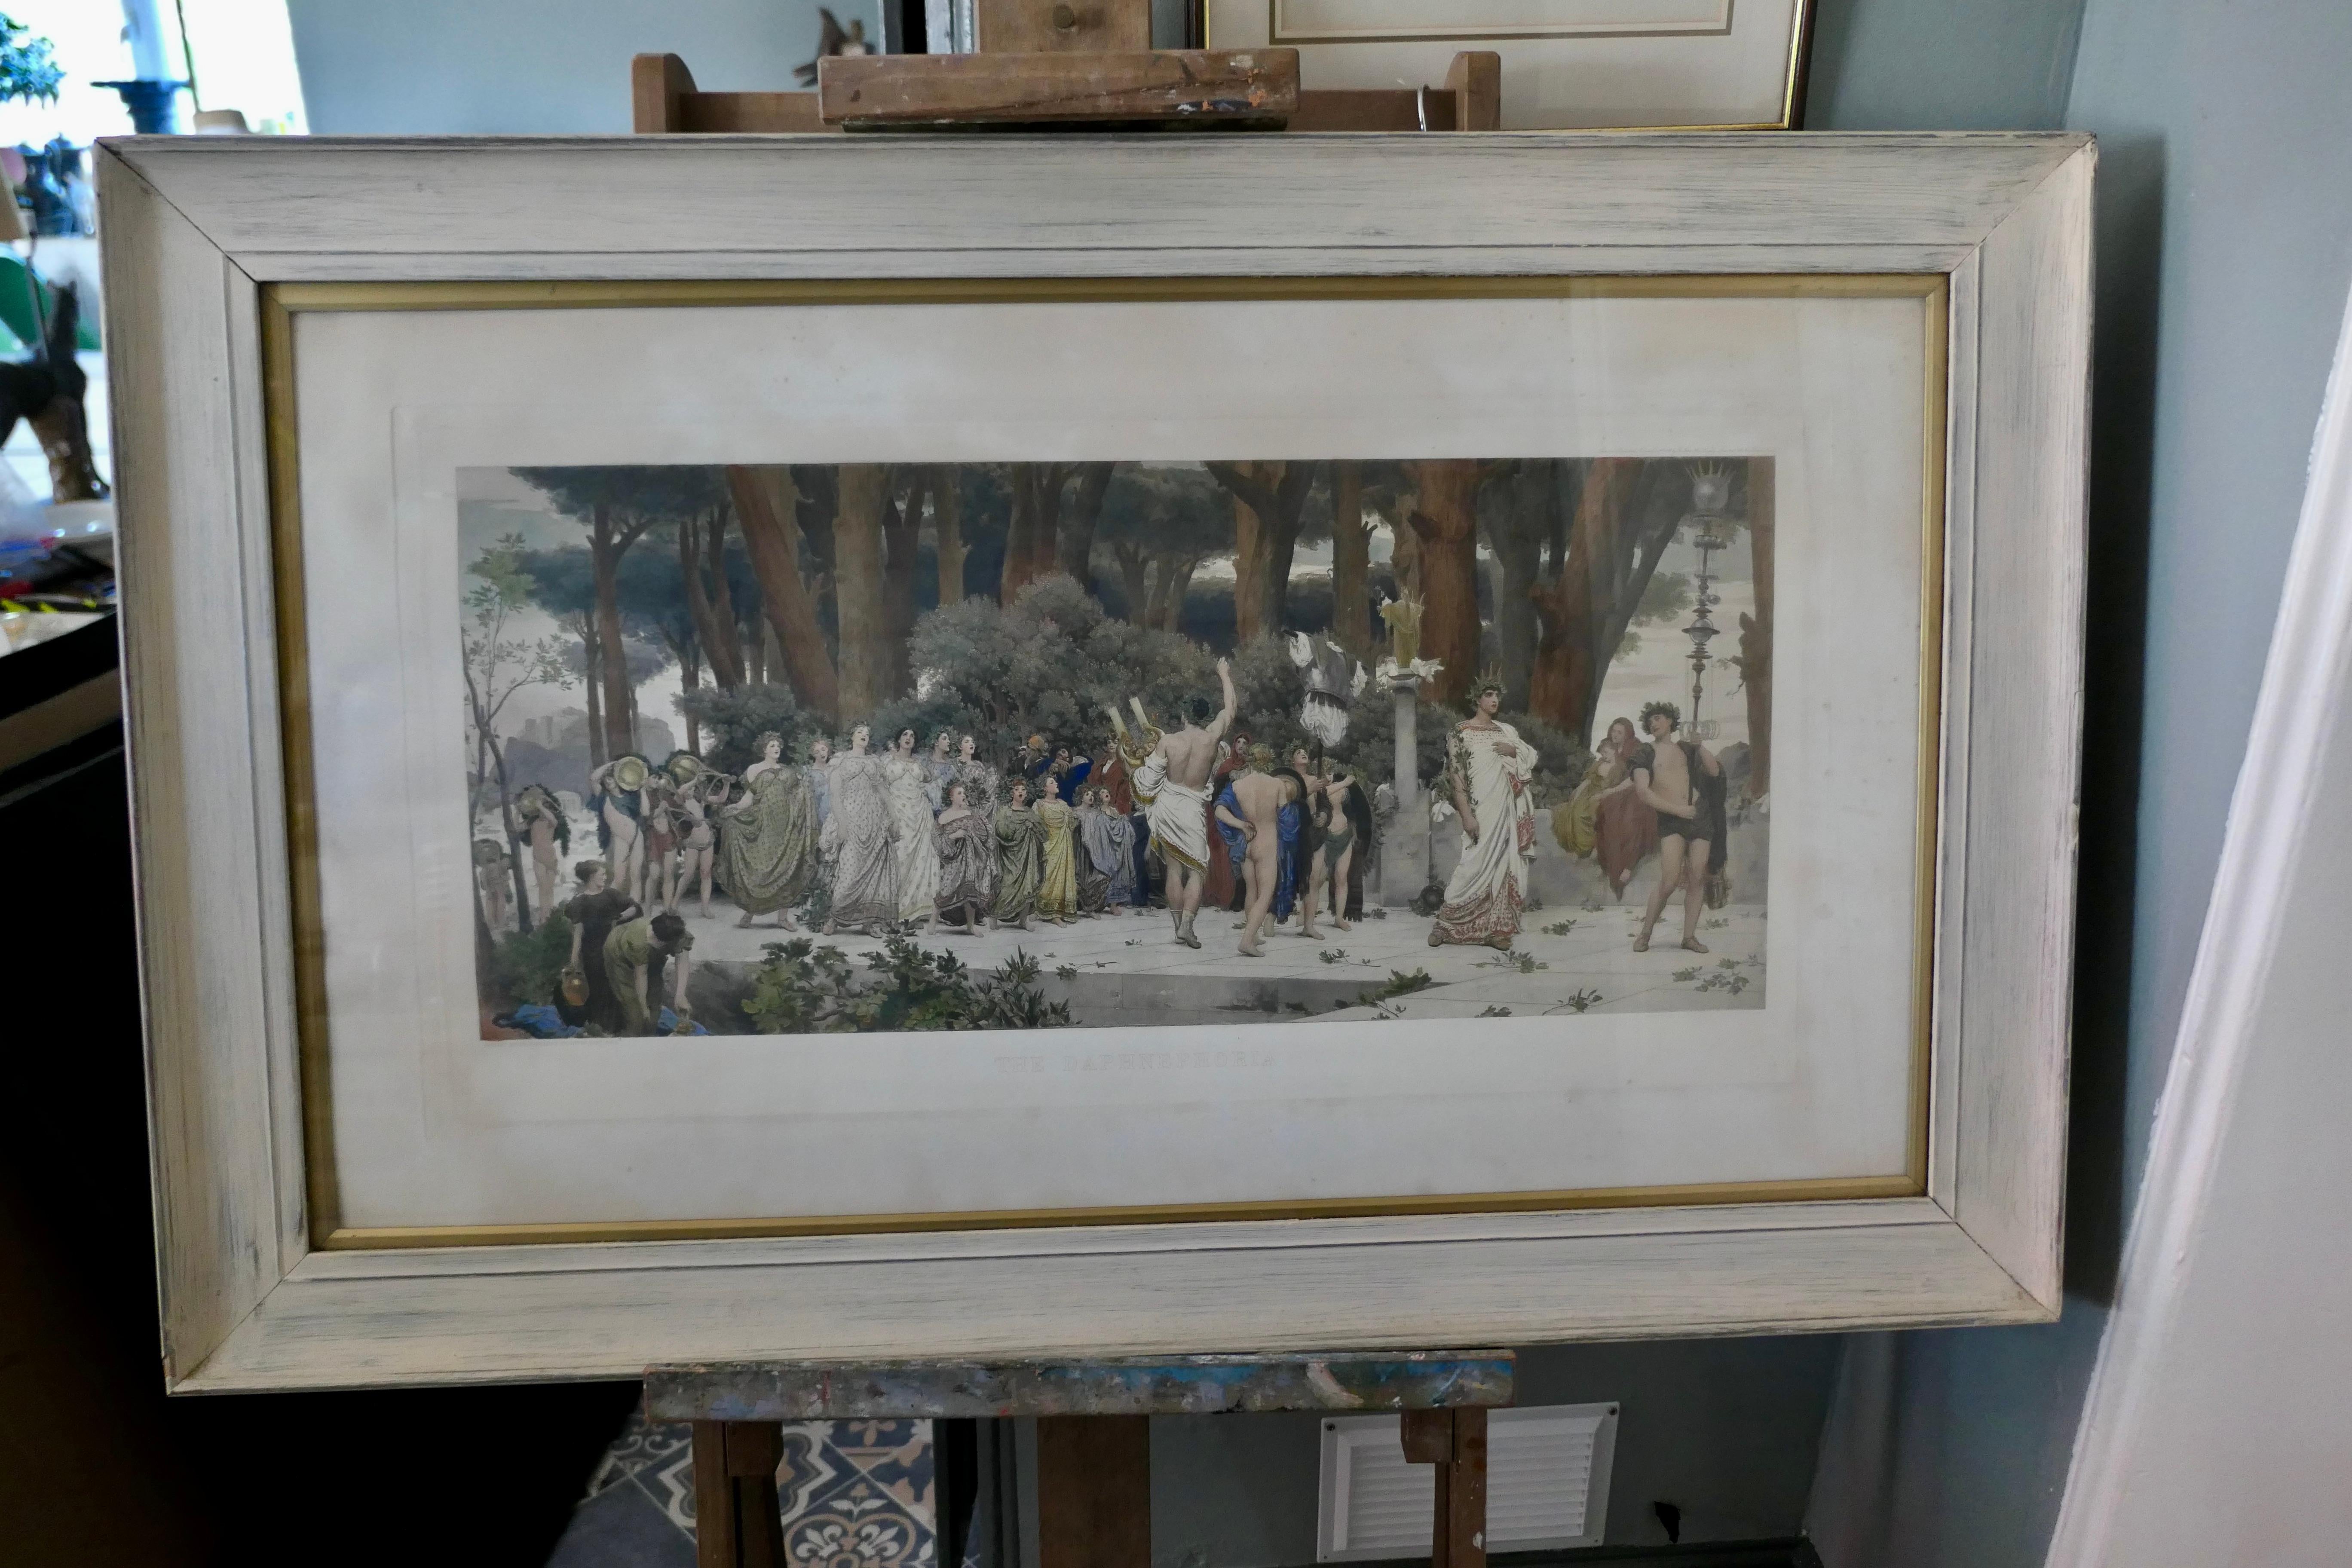 Large Victorian framed colour print of The Daphnephoria.

Large Victorian framed colour print of The Daphnephoria by Frederic Leighton (1830–1896), 1876, from Lady Lever Art Gallery.

This a large print presented in a glazed and overpainted wide